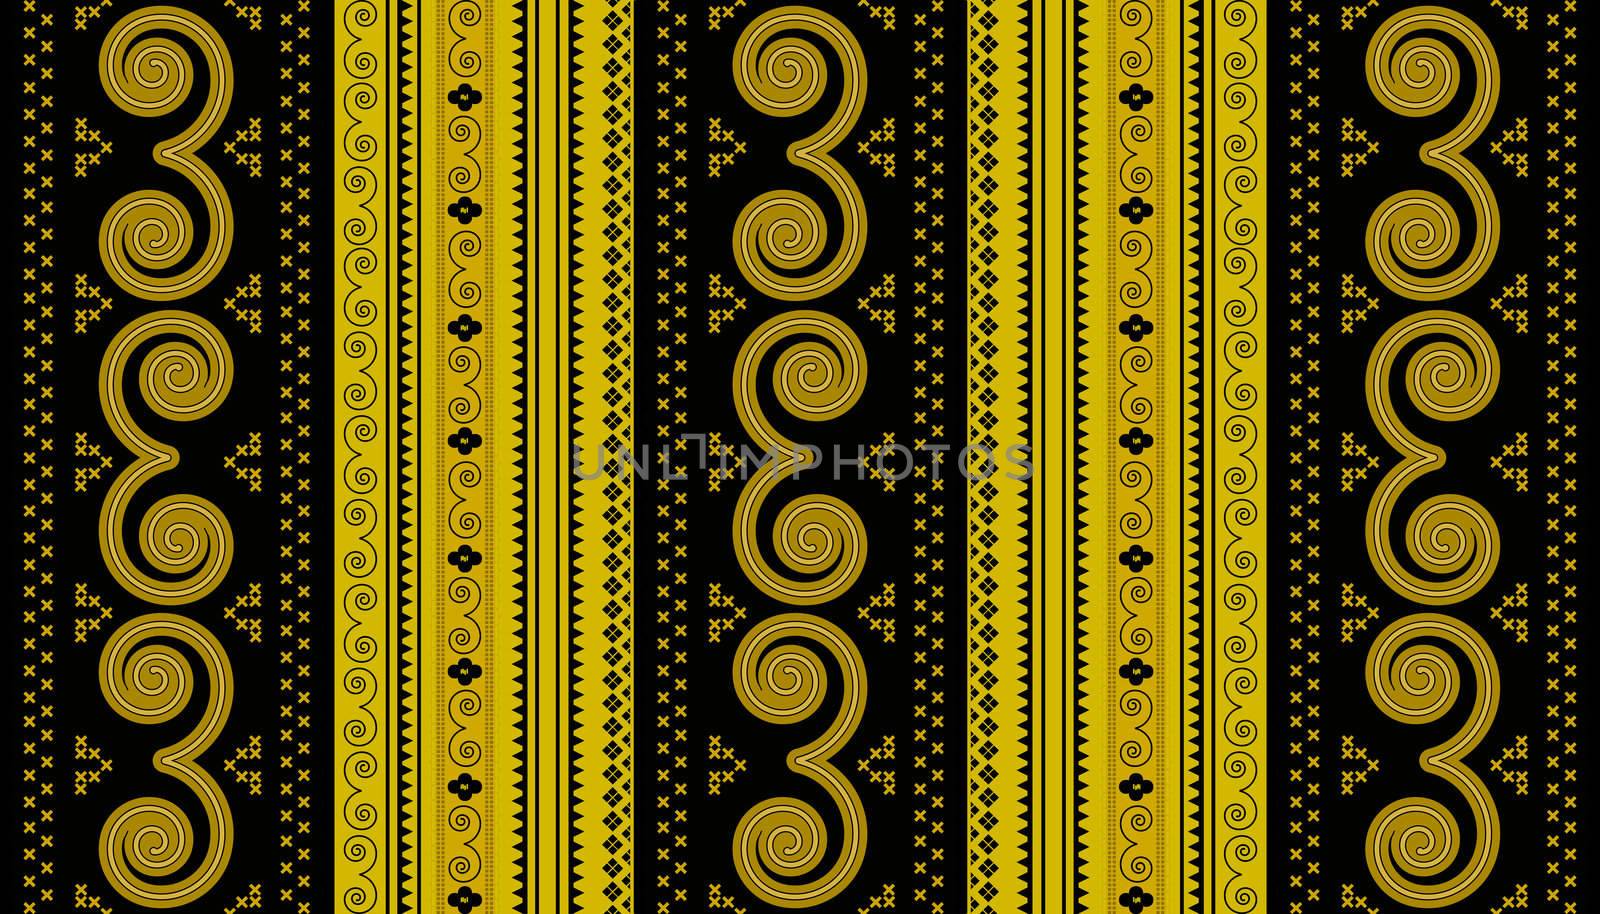 Etnic pattern with geometric shapes